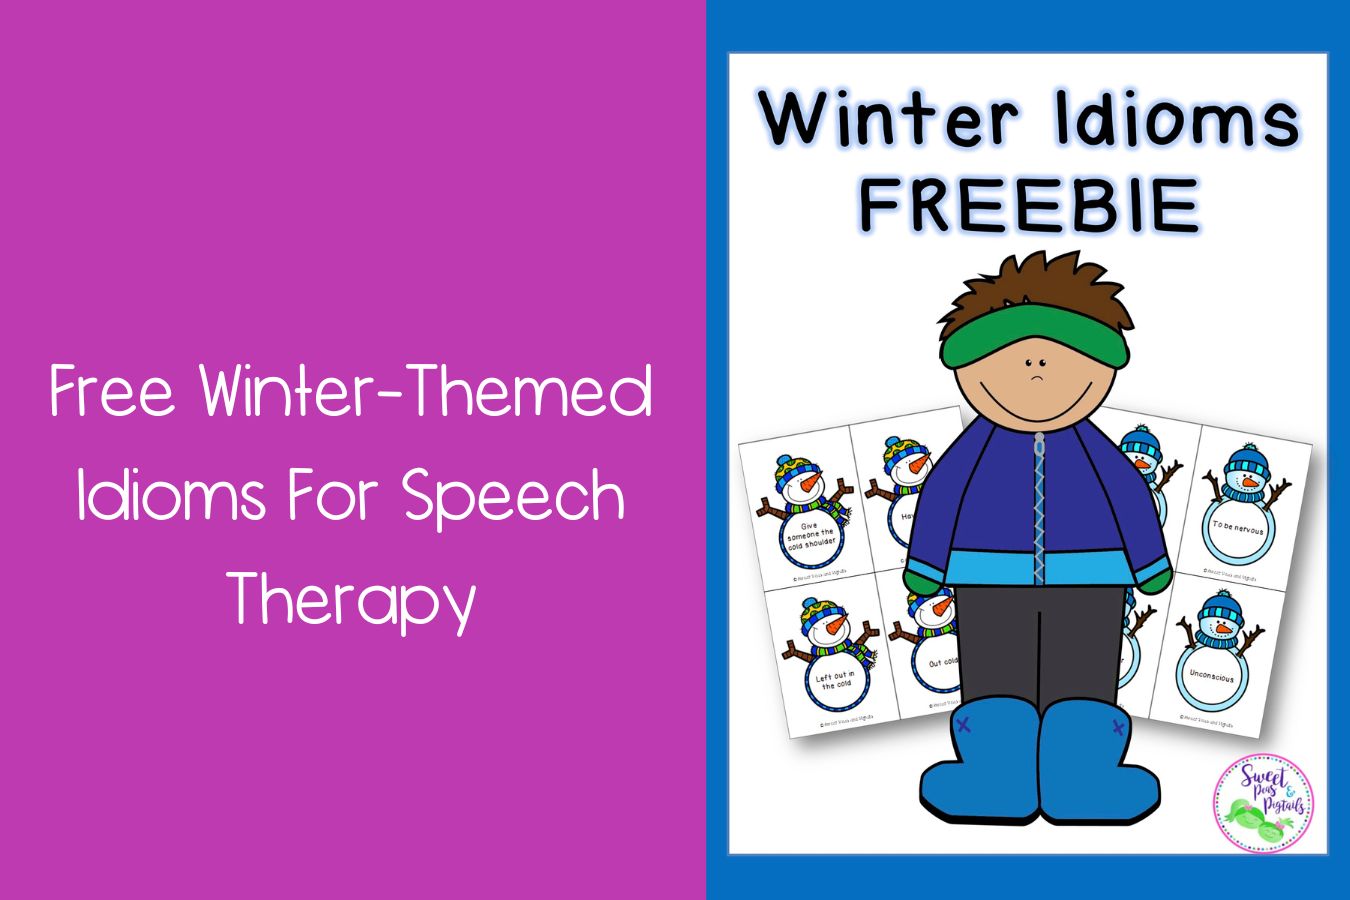 Free Winter-Themed Idioms For Speech Therapy Featured